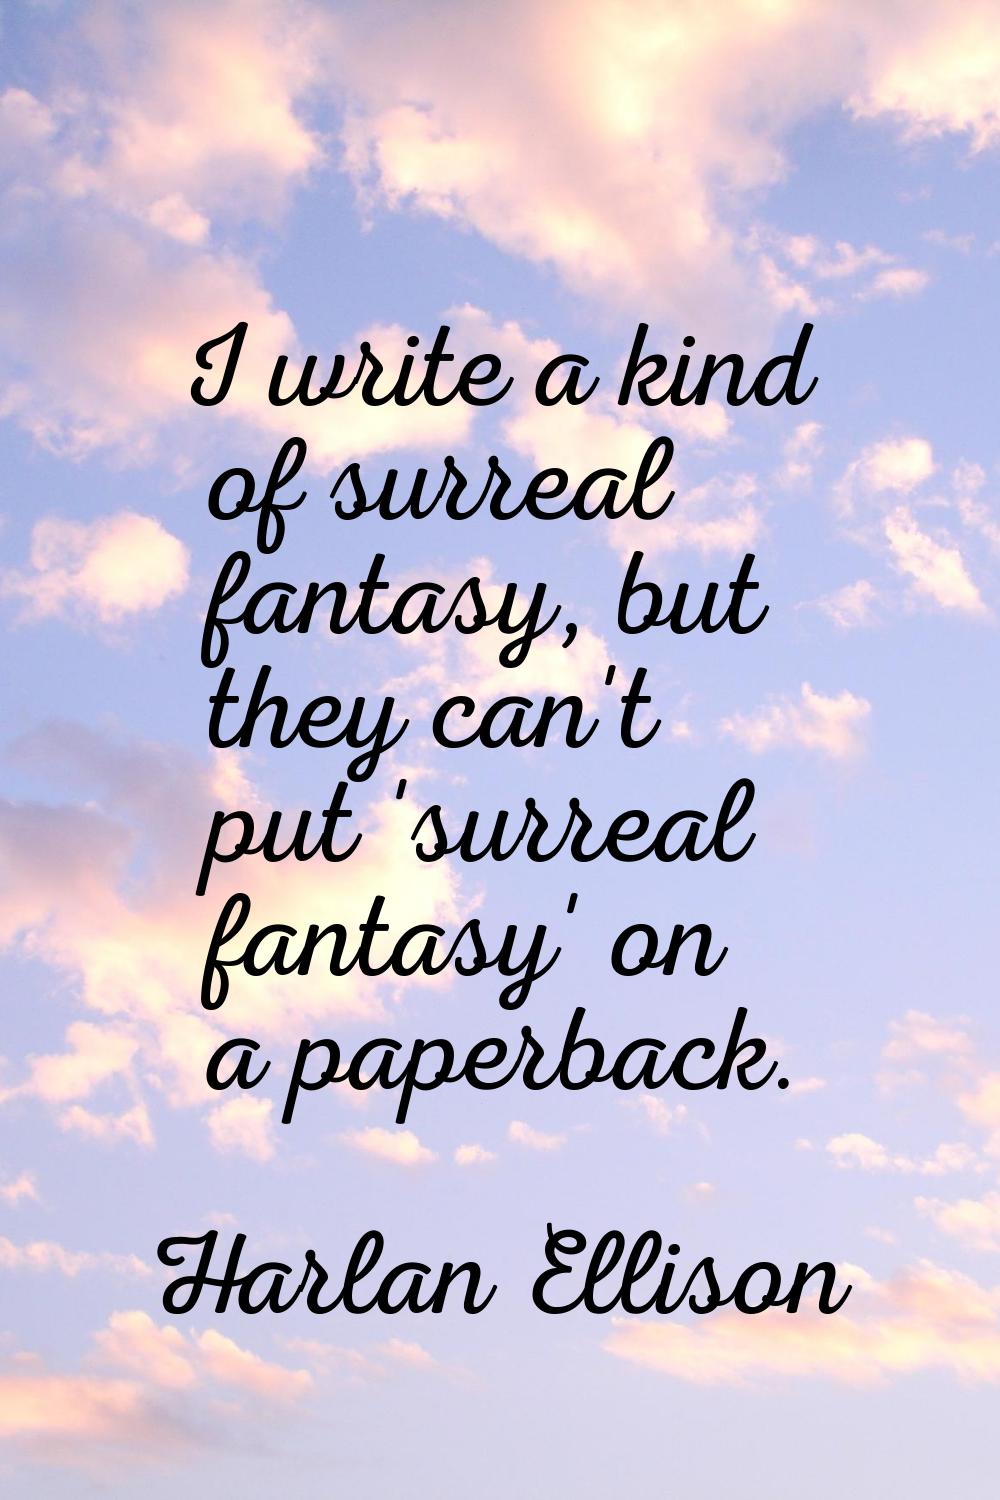 I write a kind of surreal fantasy, but they can't put 'surreal fantasy' on a paperback.